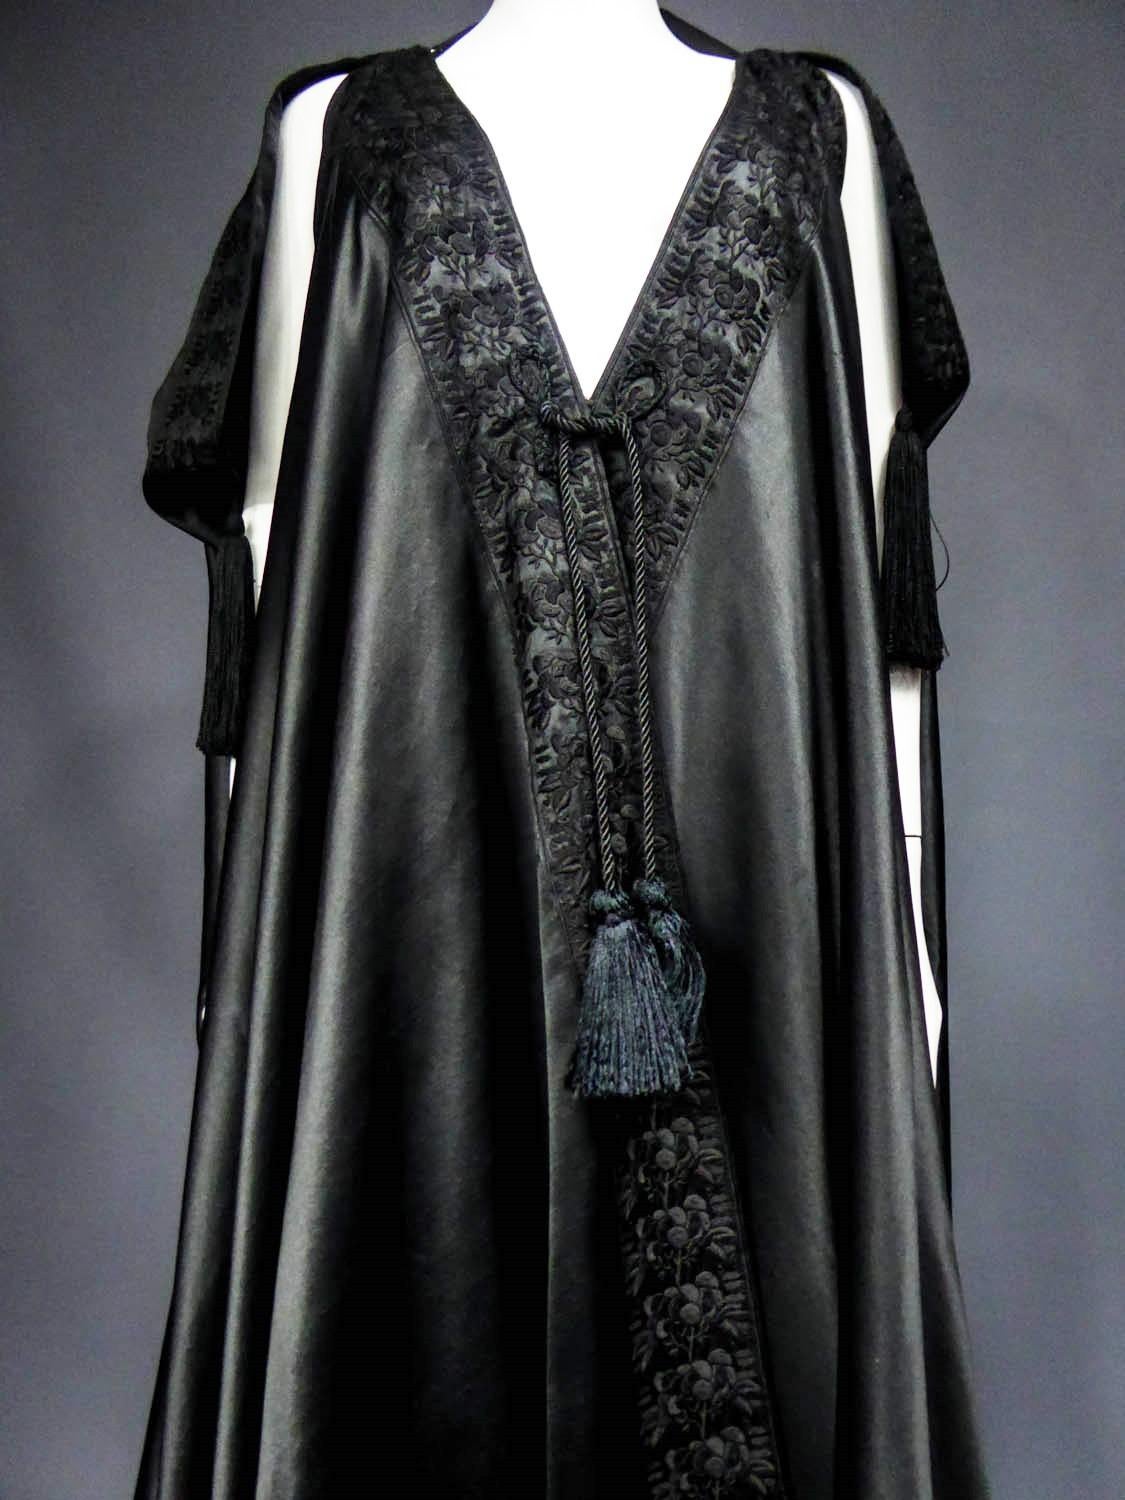 Circa 1920
England

Amazing evening cape in the Djellaba spirit in black Duchesse satin silk by Liberty and Co dating from the years 1920 - 1930. Cape with small slashed sleeves and pompoms of silk trimmings to pass the arms. Beautiful black duchess